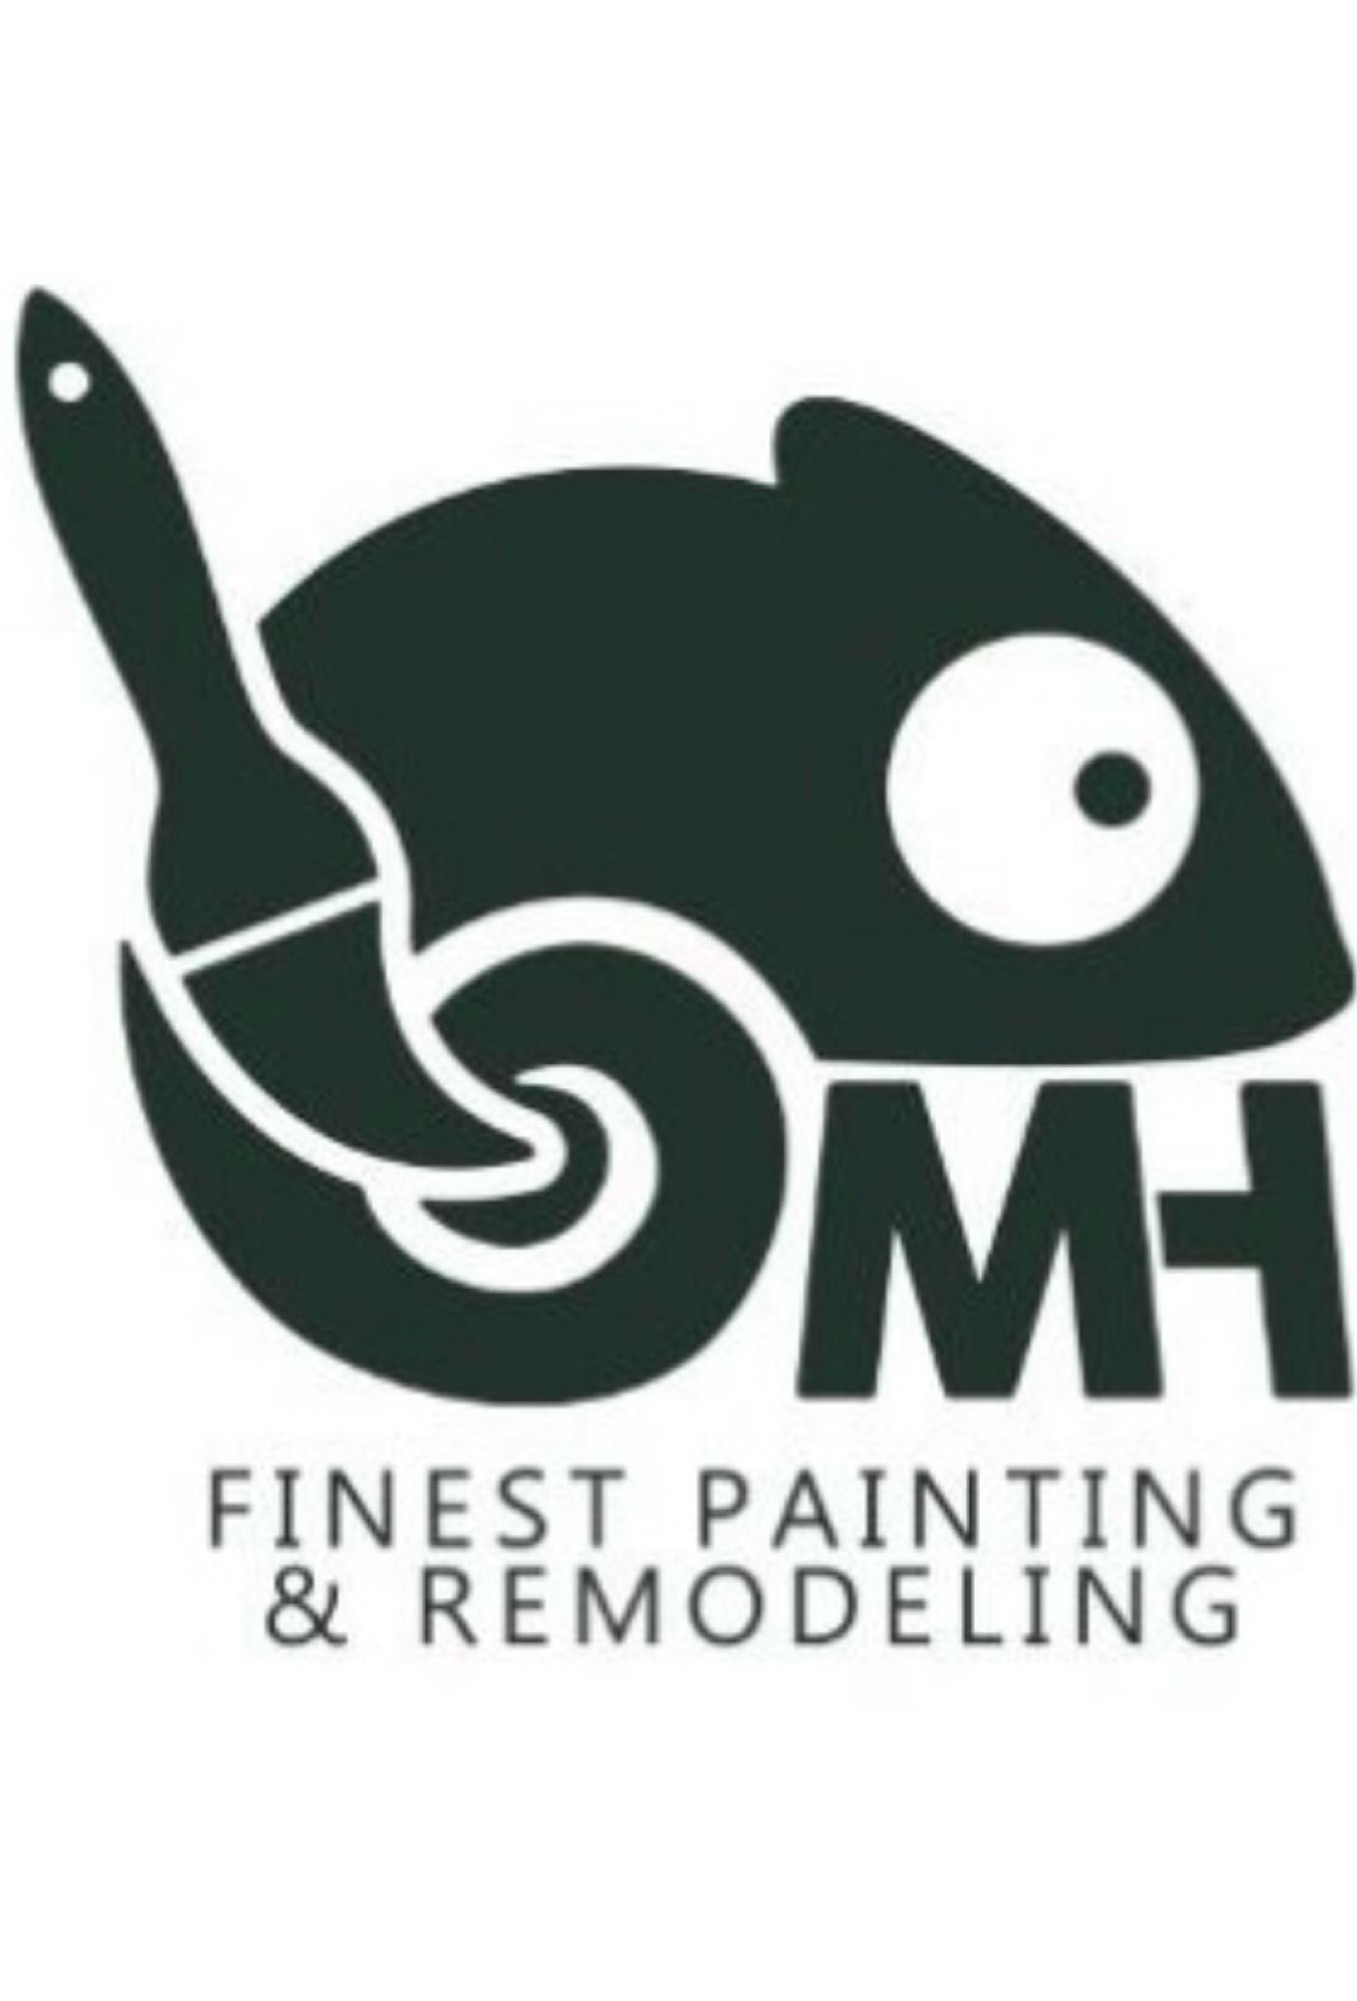 MH Finest Painting & Decorating Inc Logo